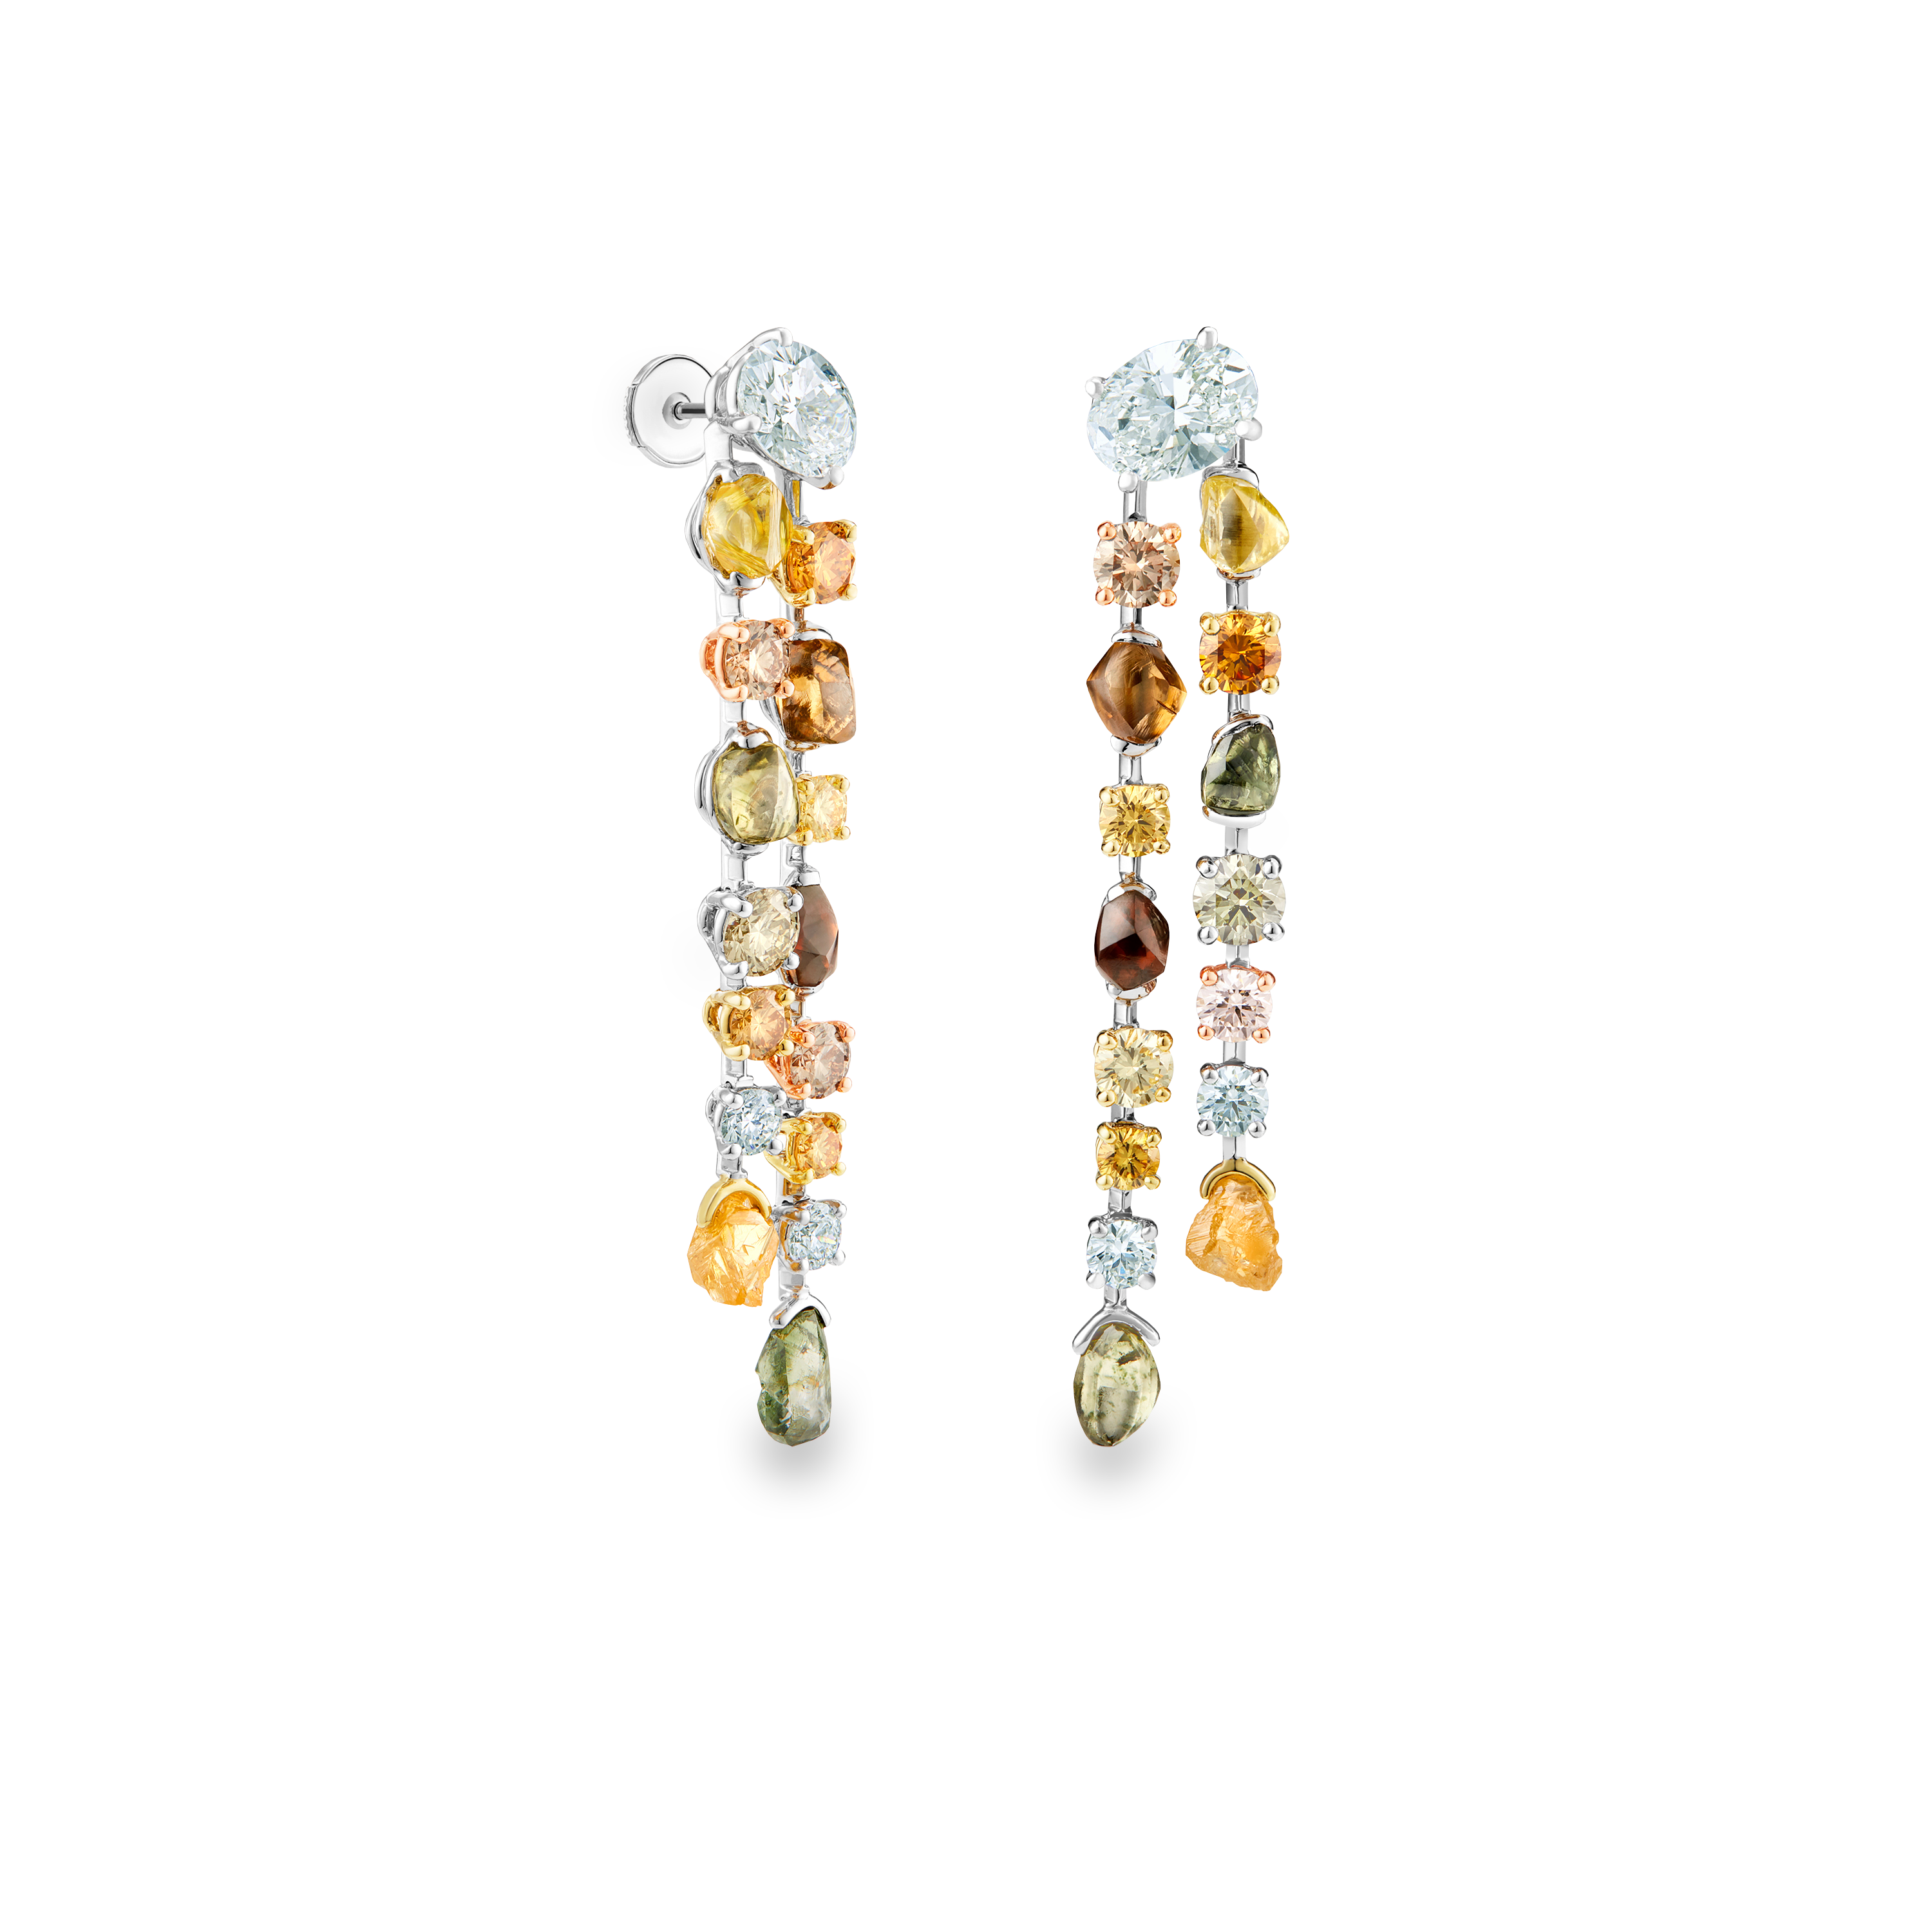 Talisman earrings in yellow gold and platinum, image 1